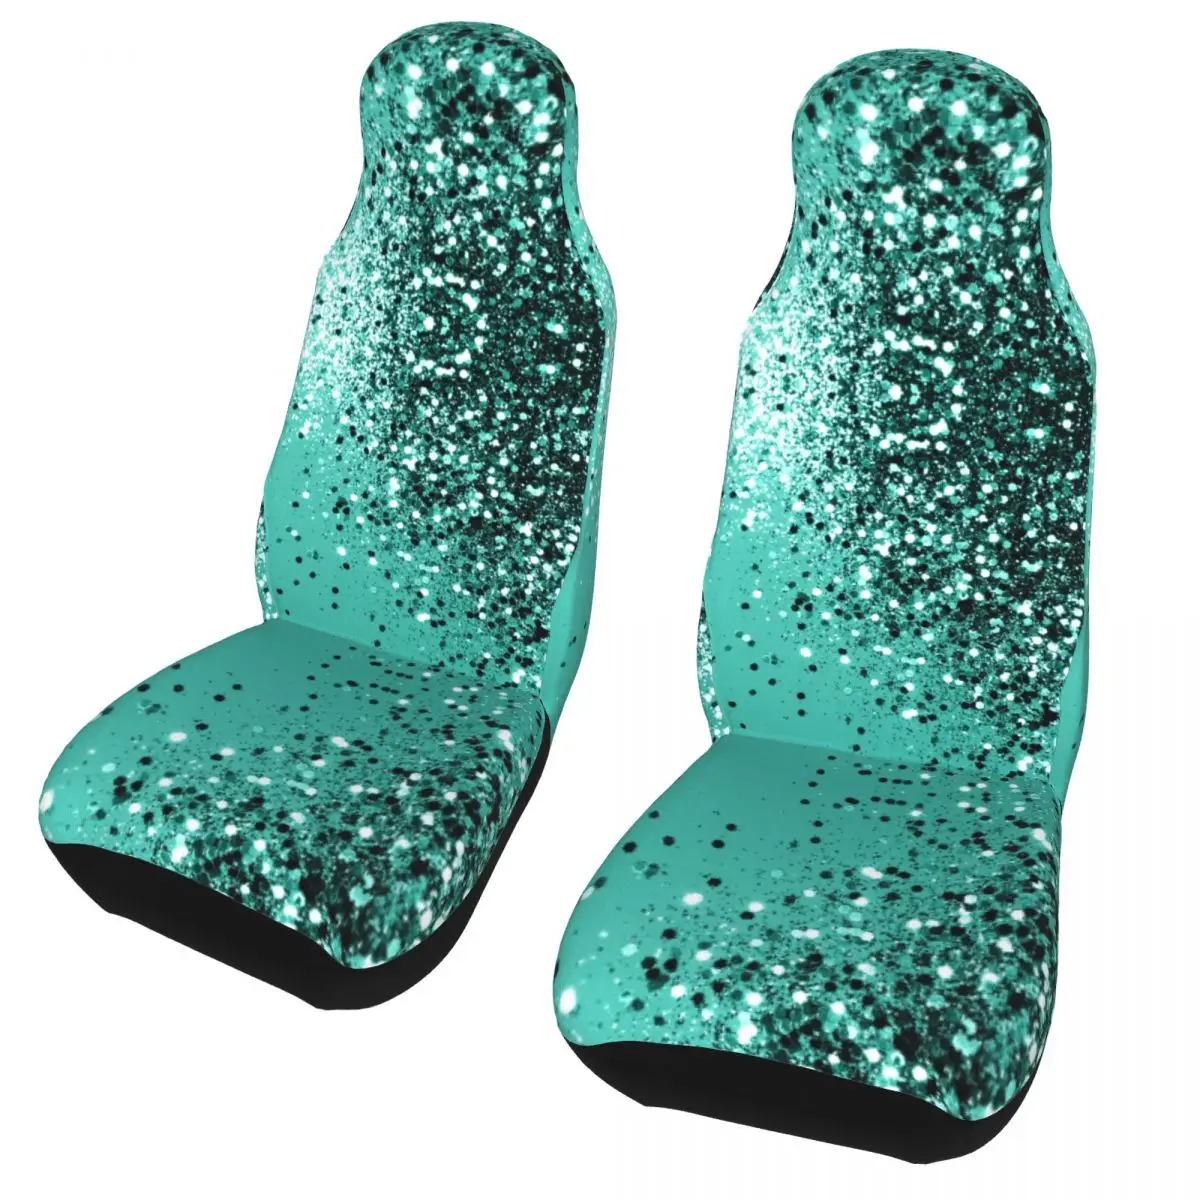 

Sparkling Turquoise Lady Glitter Universal Car Seat Cover Protector Interior Accessories Travel Car Seats Covers Seat Protector